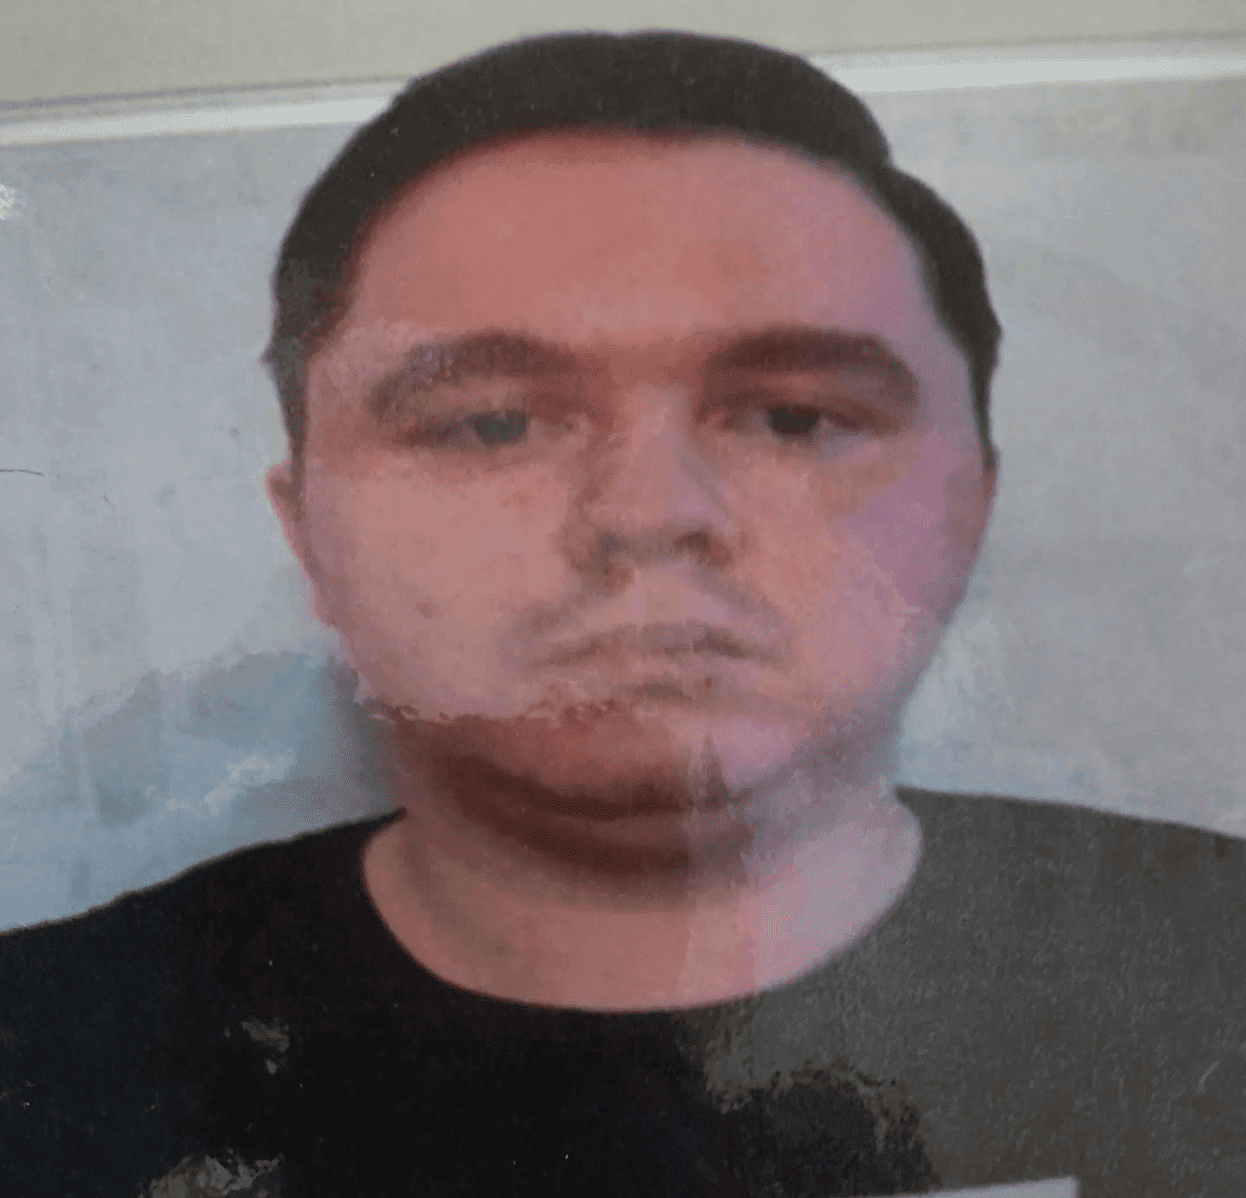 Information Is Sought To Help Locate A Man Missing From Dartford